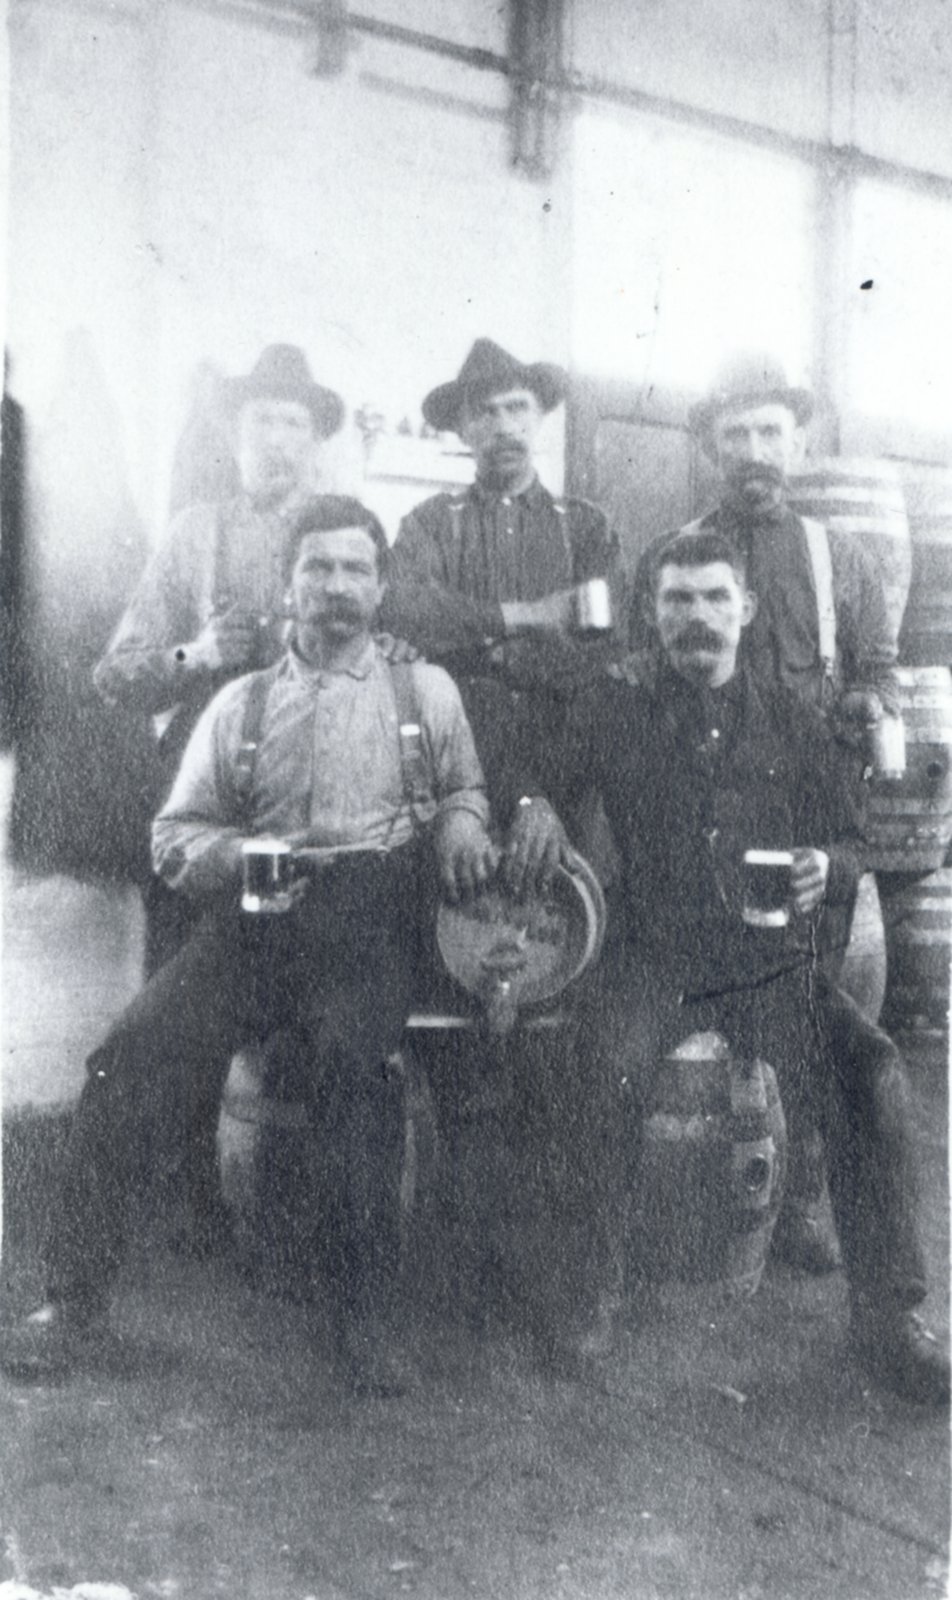 Men sitting with kegs, holding glasses of beer